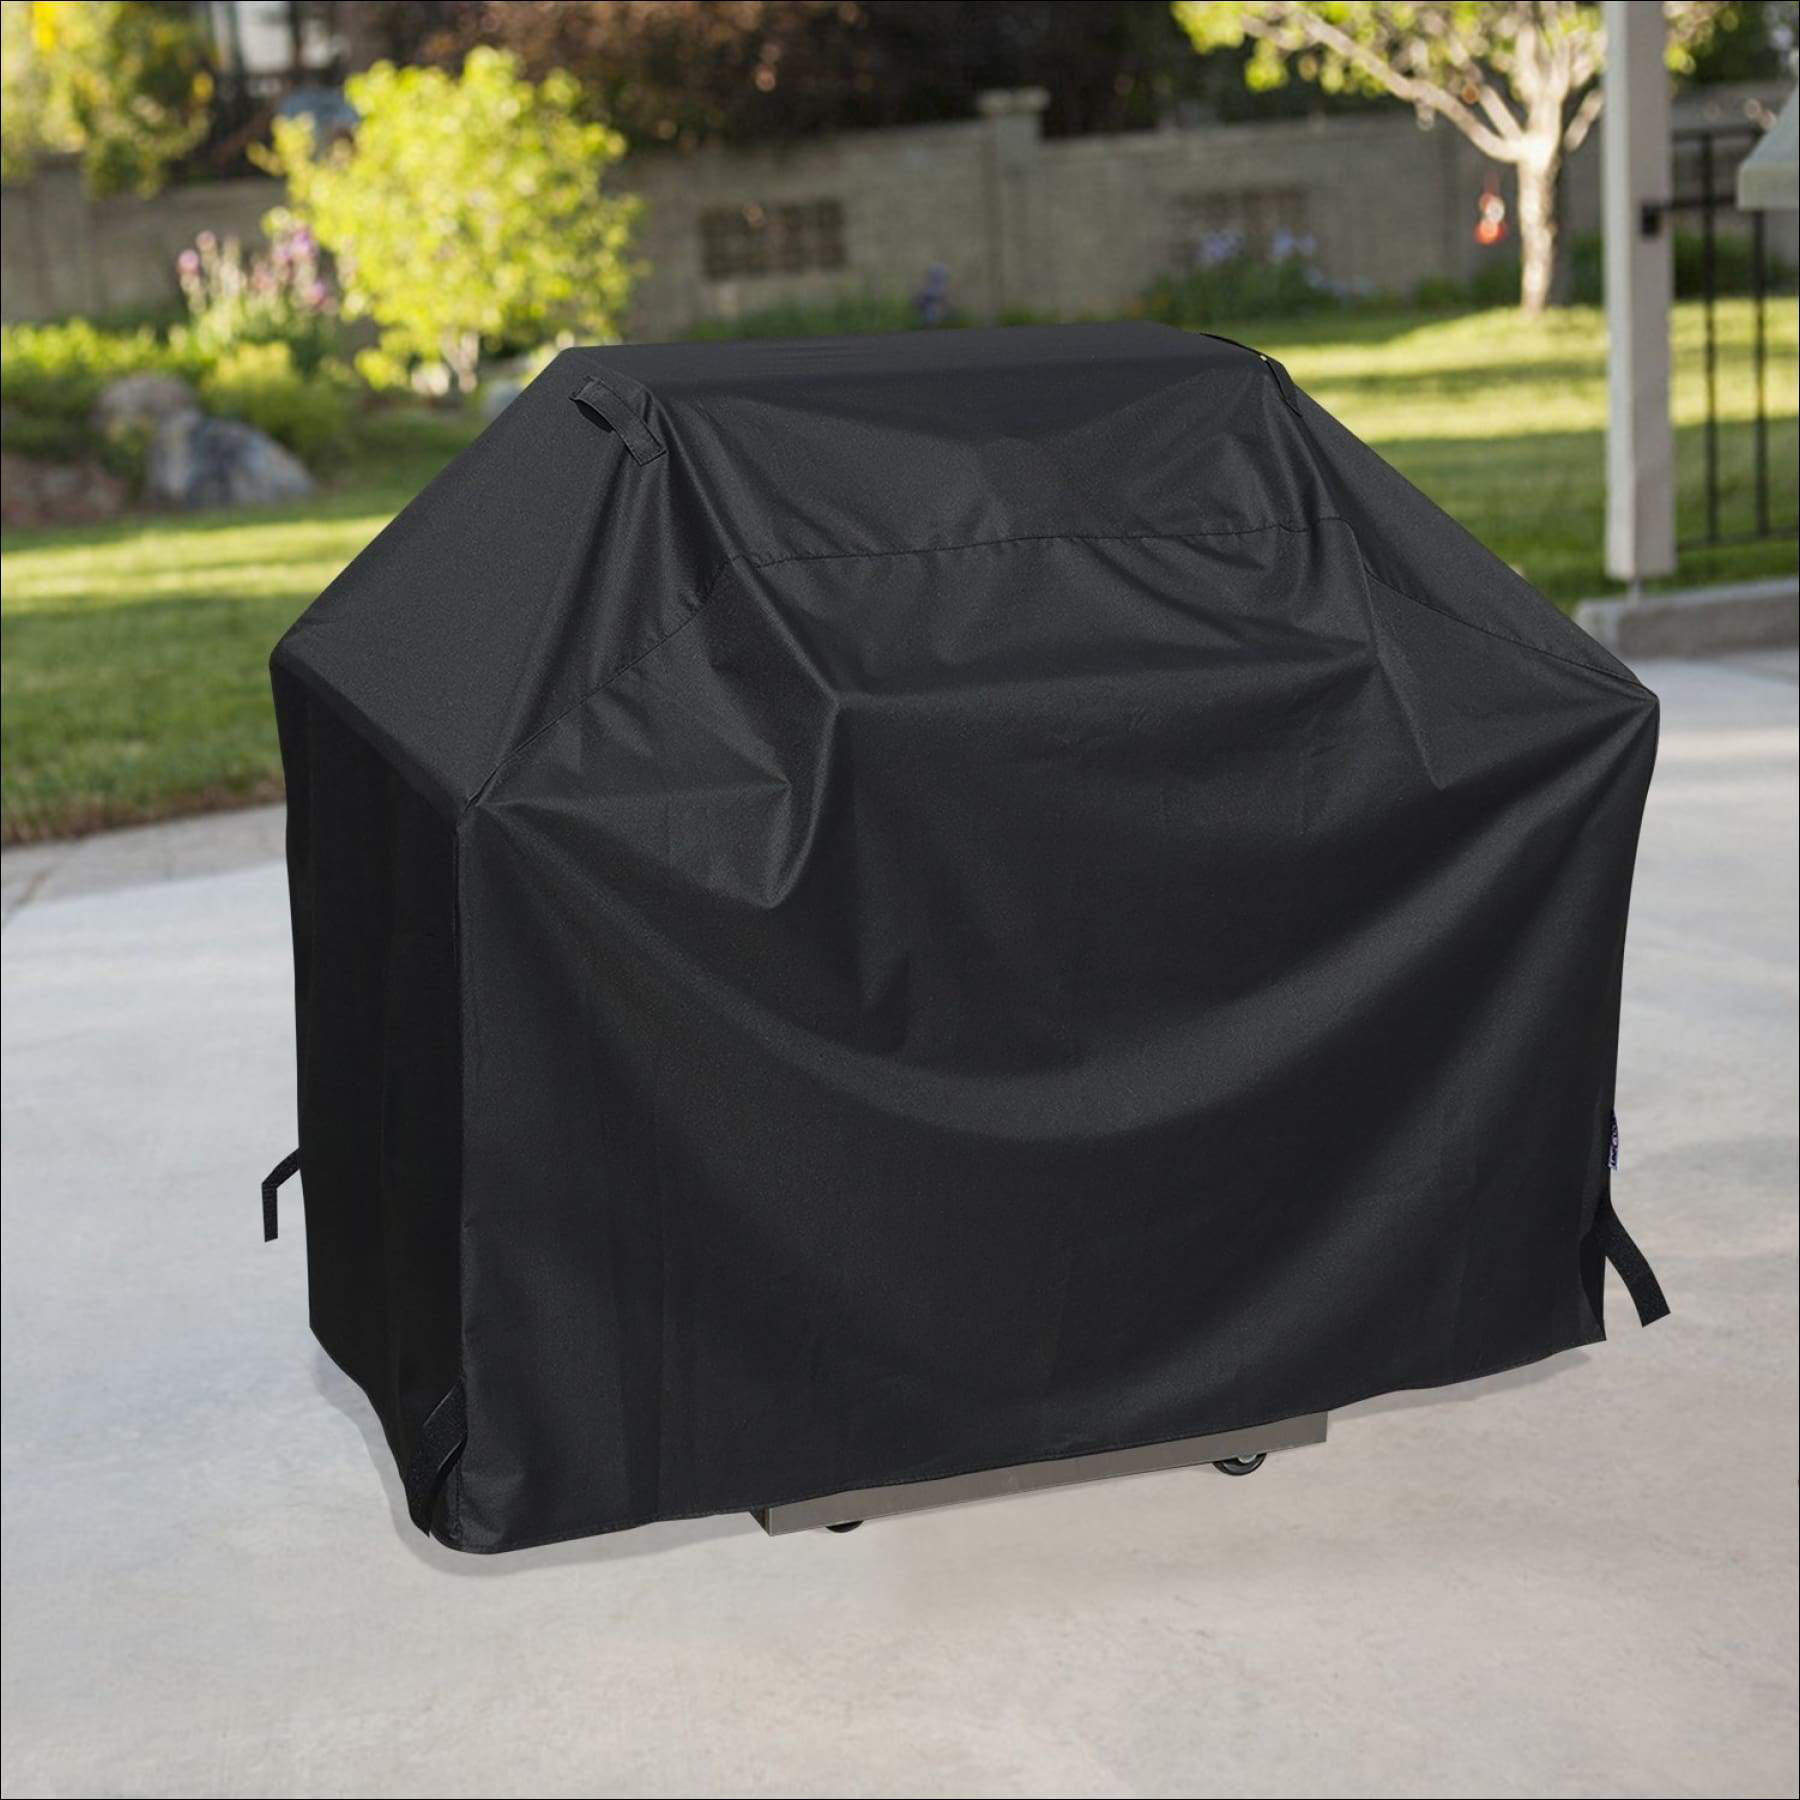 UNIVERSITY OF MISSOURI 68" Barbecue BBQ Barbeque Heavy Duty Gas Grill Cover 